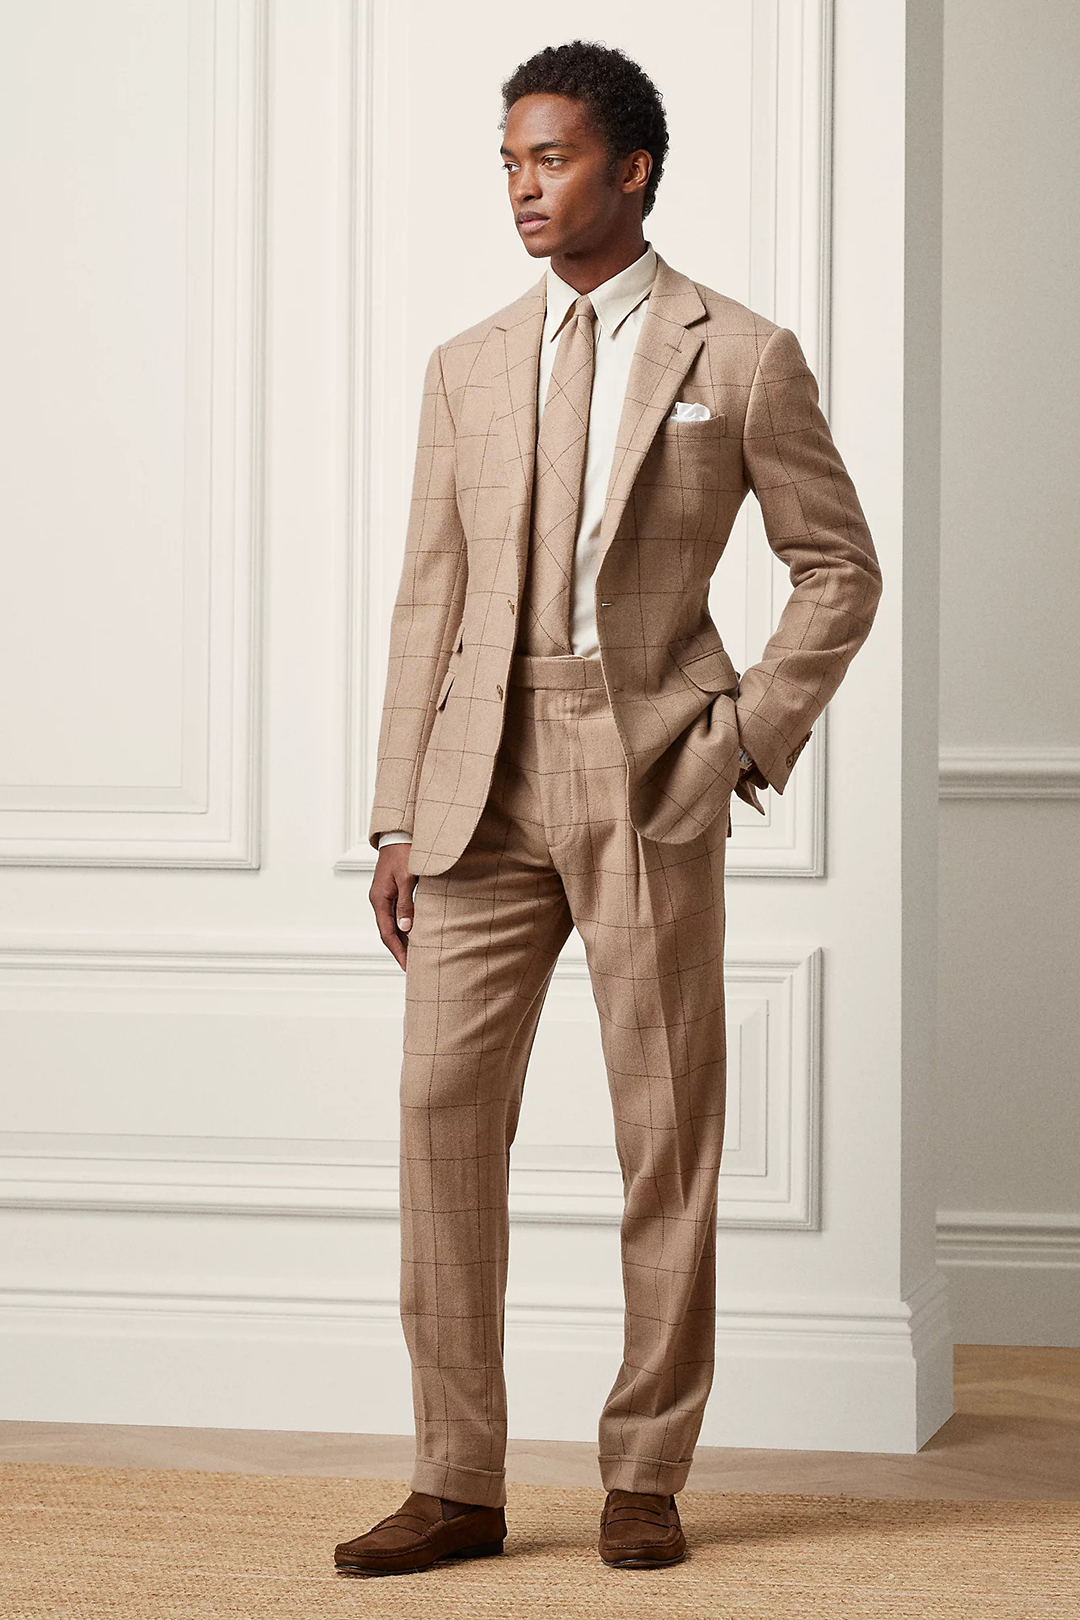 Brown windowpane suit, white dress shirt, brown tie, and dark brown loafers outfit